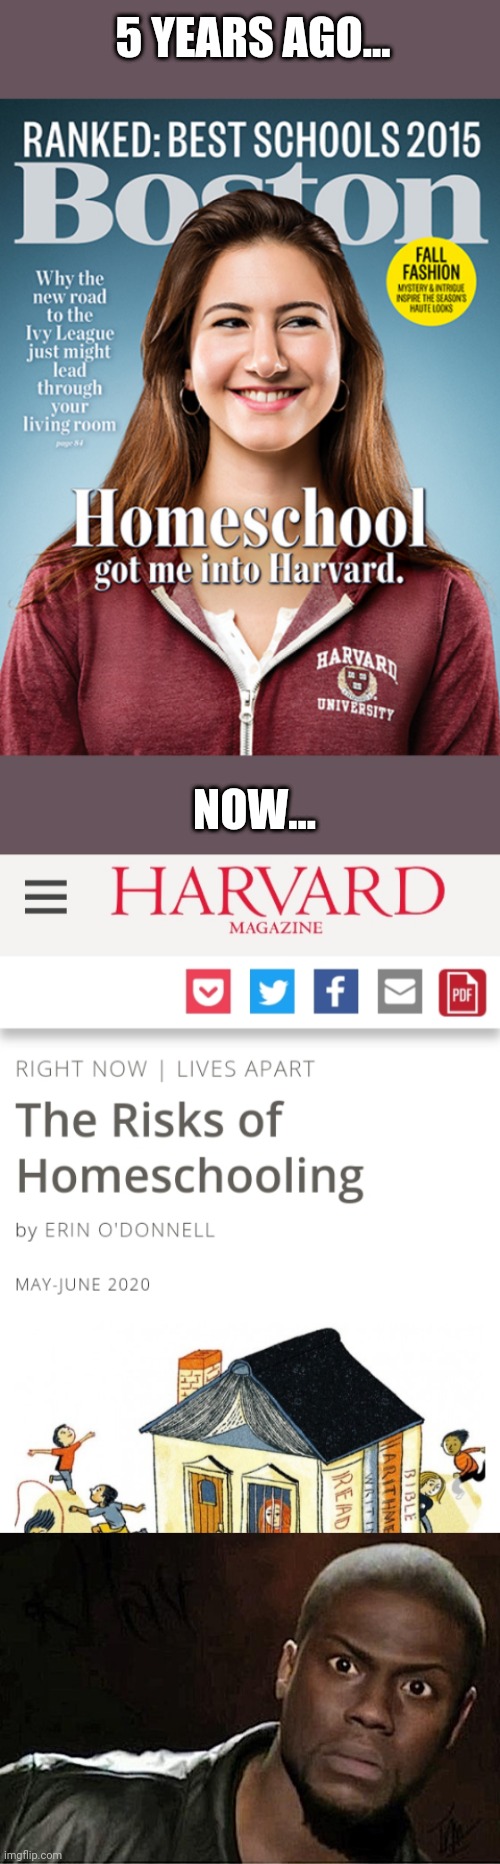 I guess the risks of homeschooling include... getting into Harvard, apparently. |  5 YEARS AGO... NOW... | image tagged in memes,kevin hart,harvard,article,homeschool,school choice for all | made w/ Imgflip meme maker